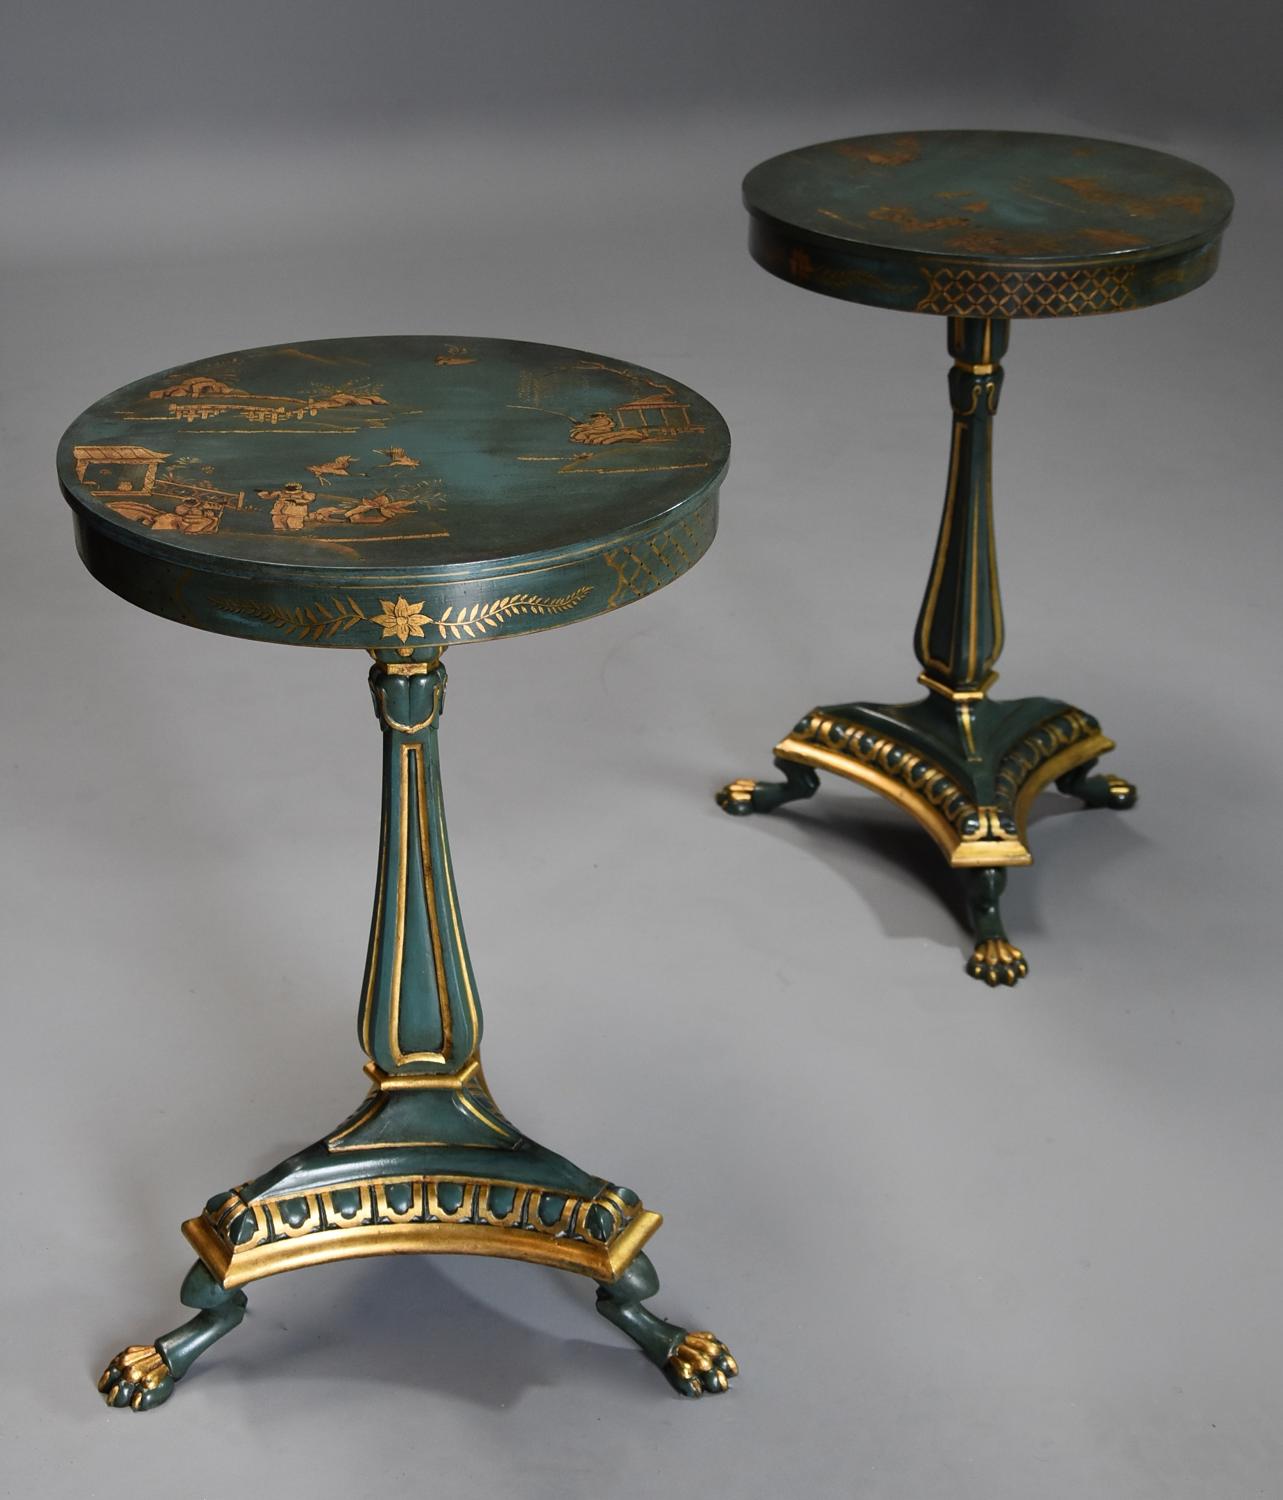 Pair of highly decorative Regency style lacquered occasional tables